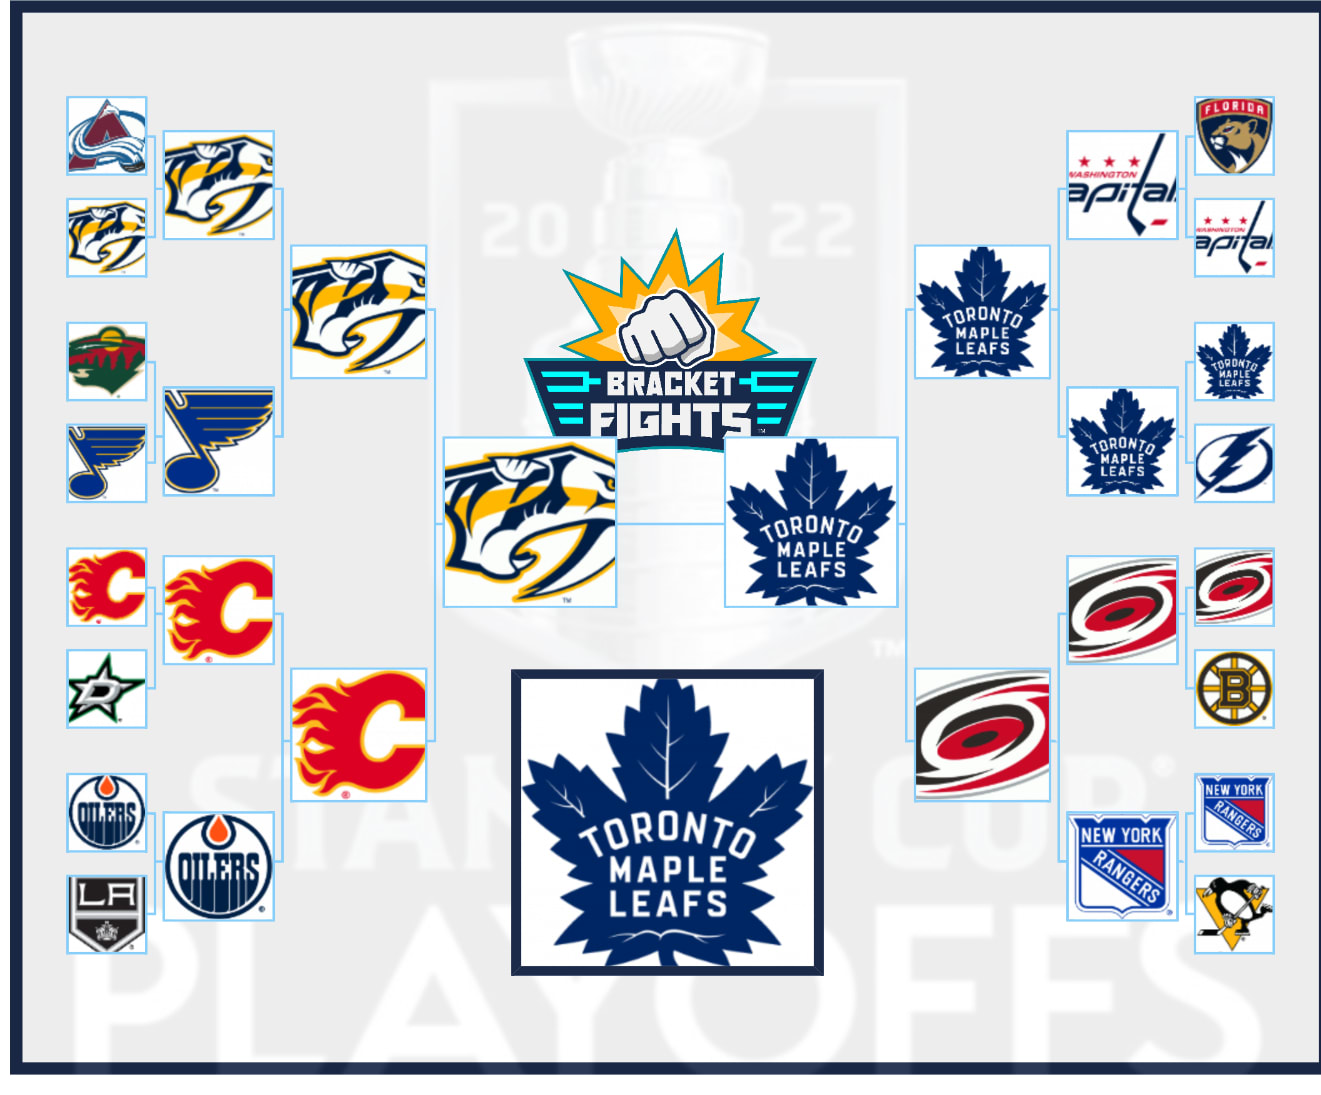 I coin flipped the 2022 NHL playoffs. Of course, the Maple Leafs won the Stanley Cup in 5 games.